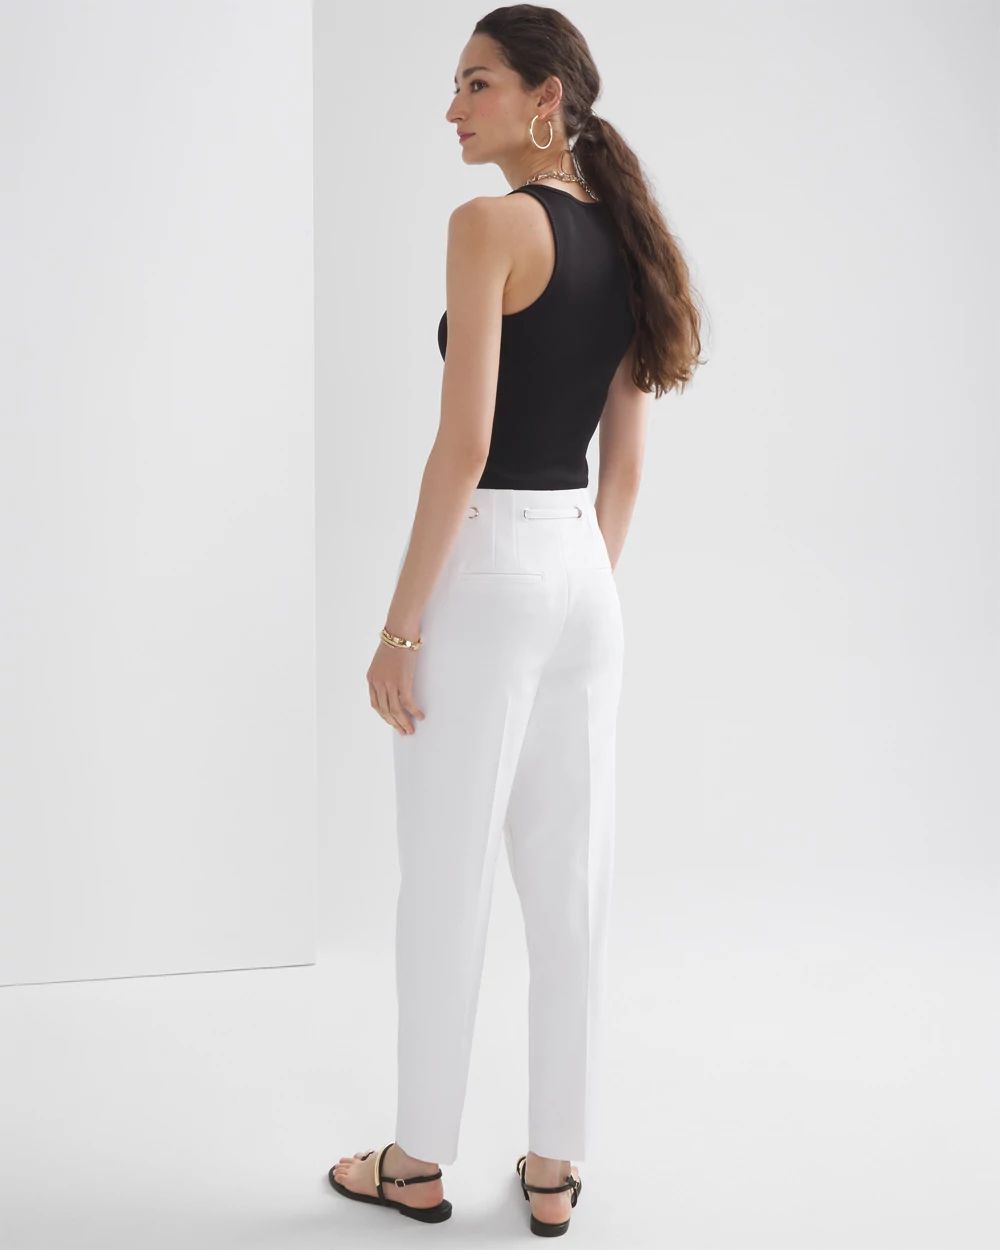 Grommet Tapered Ankle Pants click to view larger image.